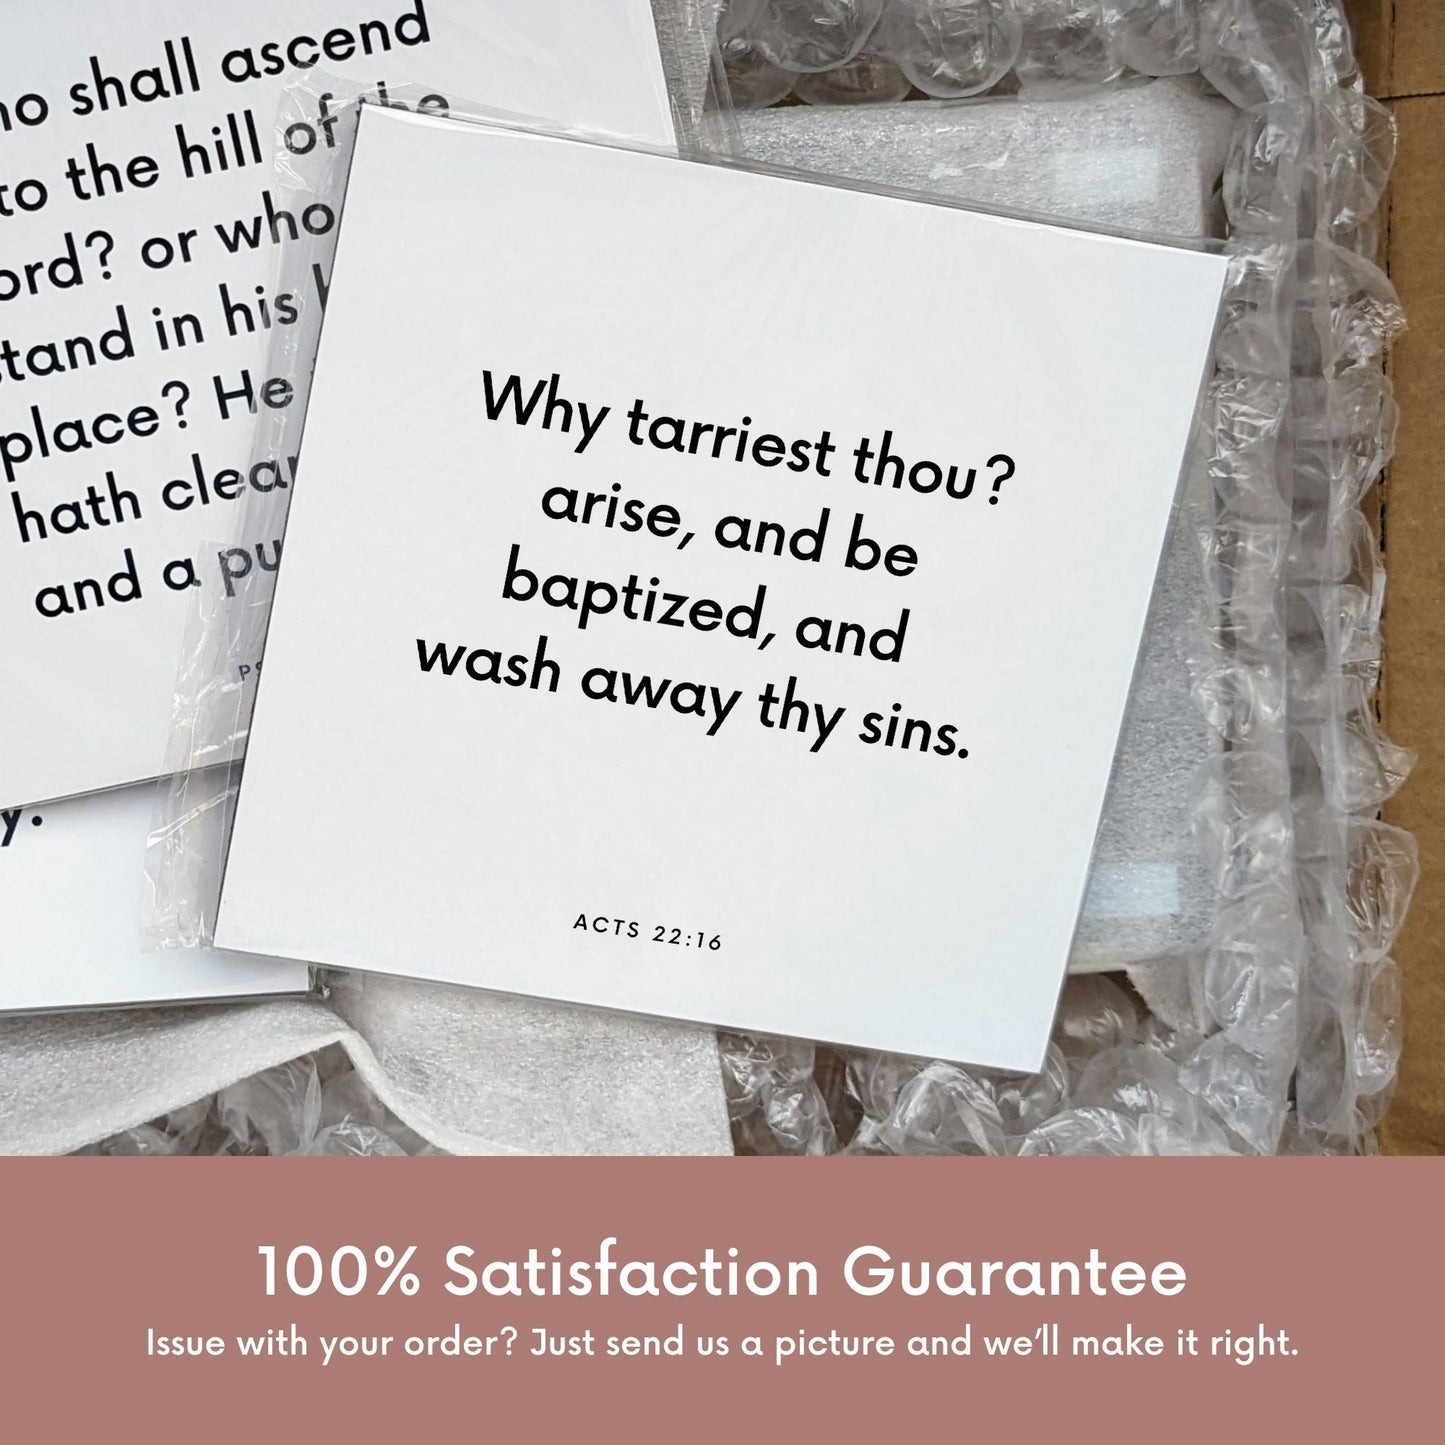 Shipping materials for scripture tile of Acts 22:16 - "Why tarriest thou? arise, and be baptized"